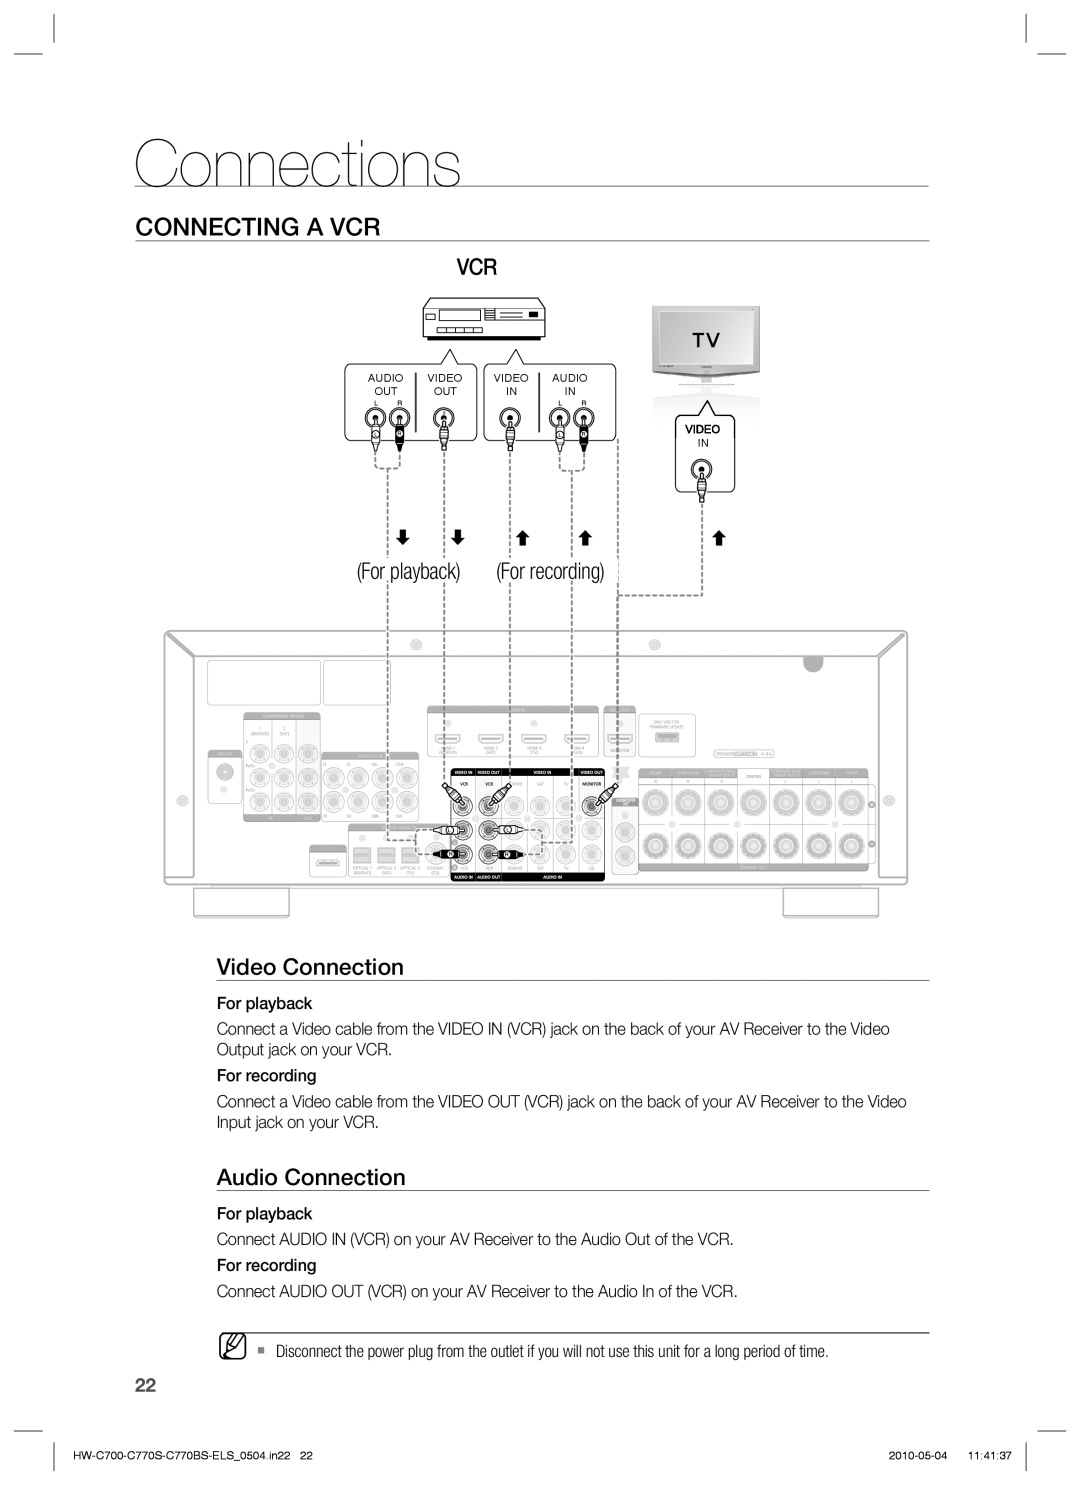 Samsung HW-C770S/EDC manual Connections, Connecting A Vcr, For playback For recording Video Connection, Audio Connection 